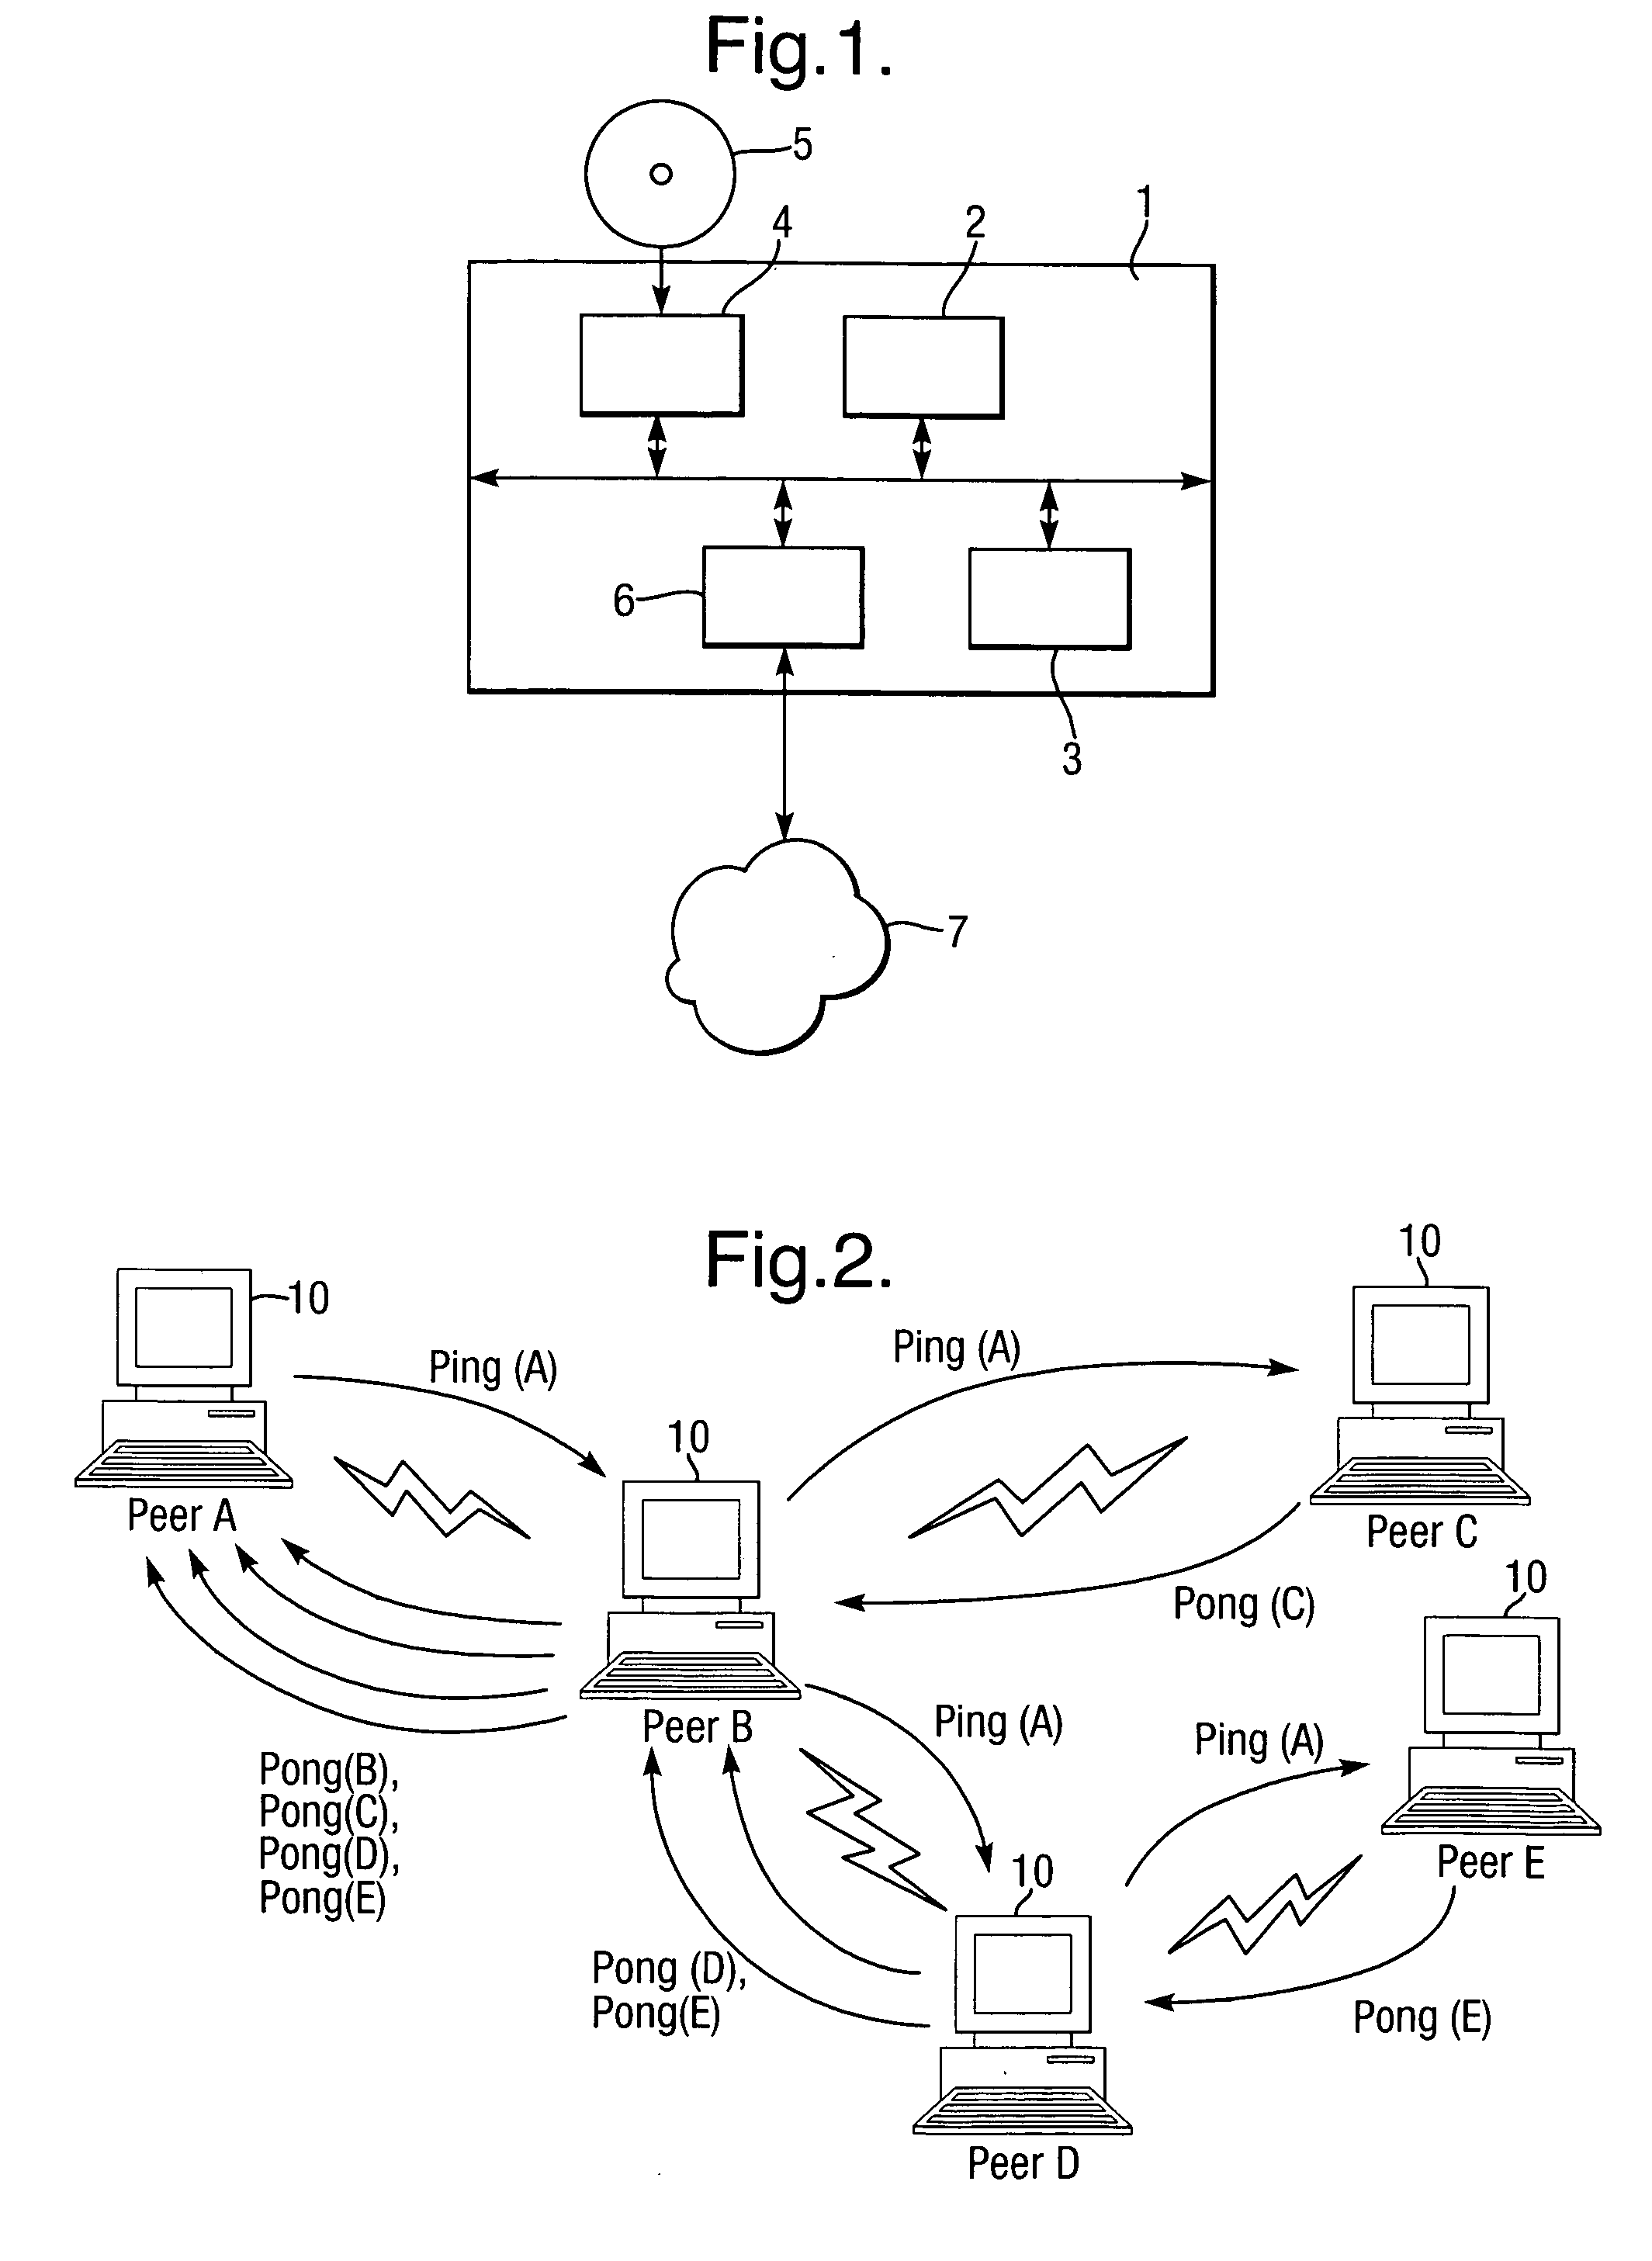 Storage of content data in a peer-to-peer network